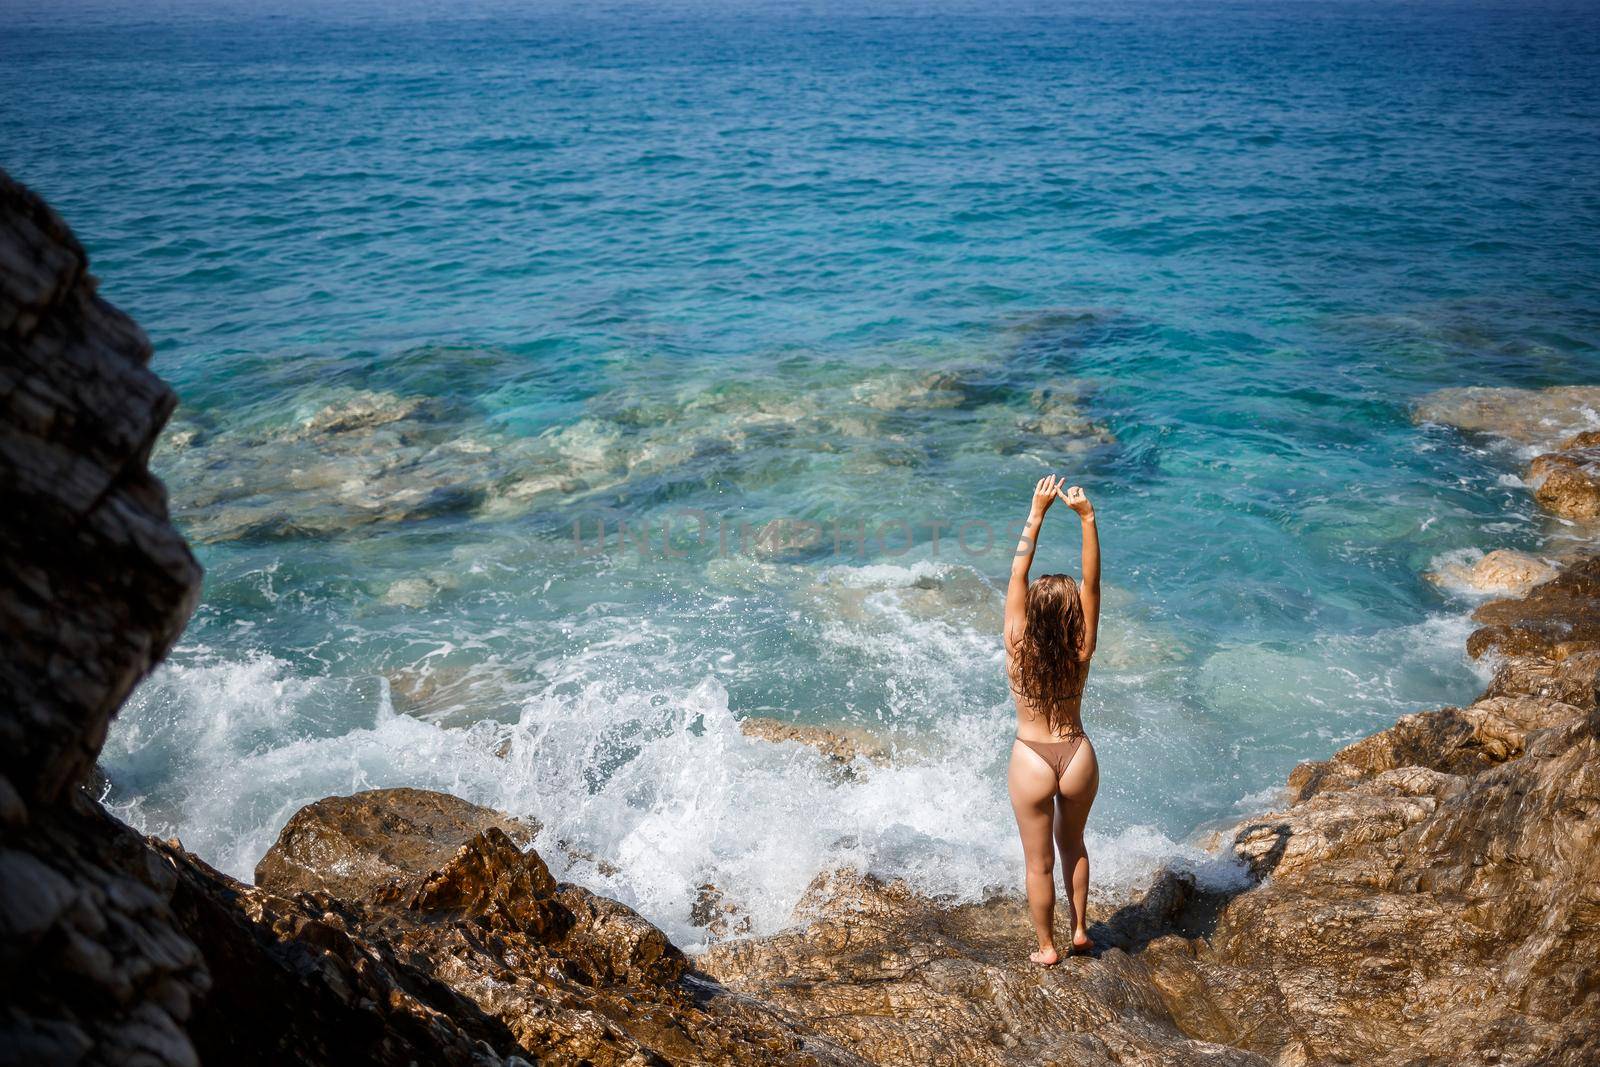 Sexy woman in full body swimsuit with long hair walks on large rocks on a rocky beach during a storm at sea. Back view. Woman swimwear island tropics landscape exotic walk